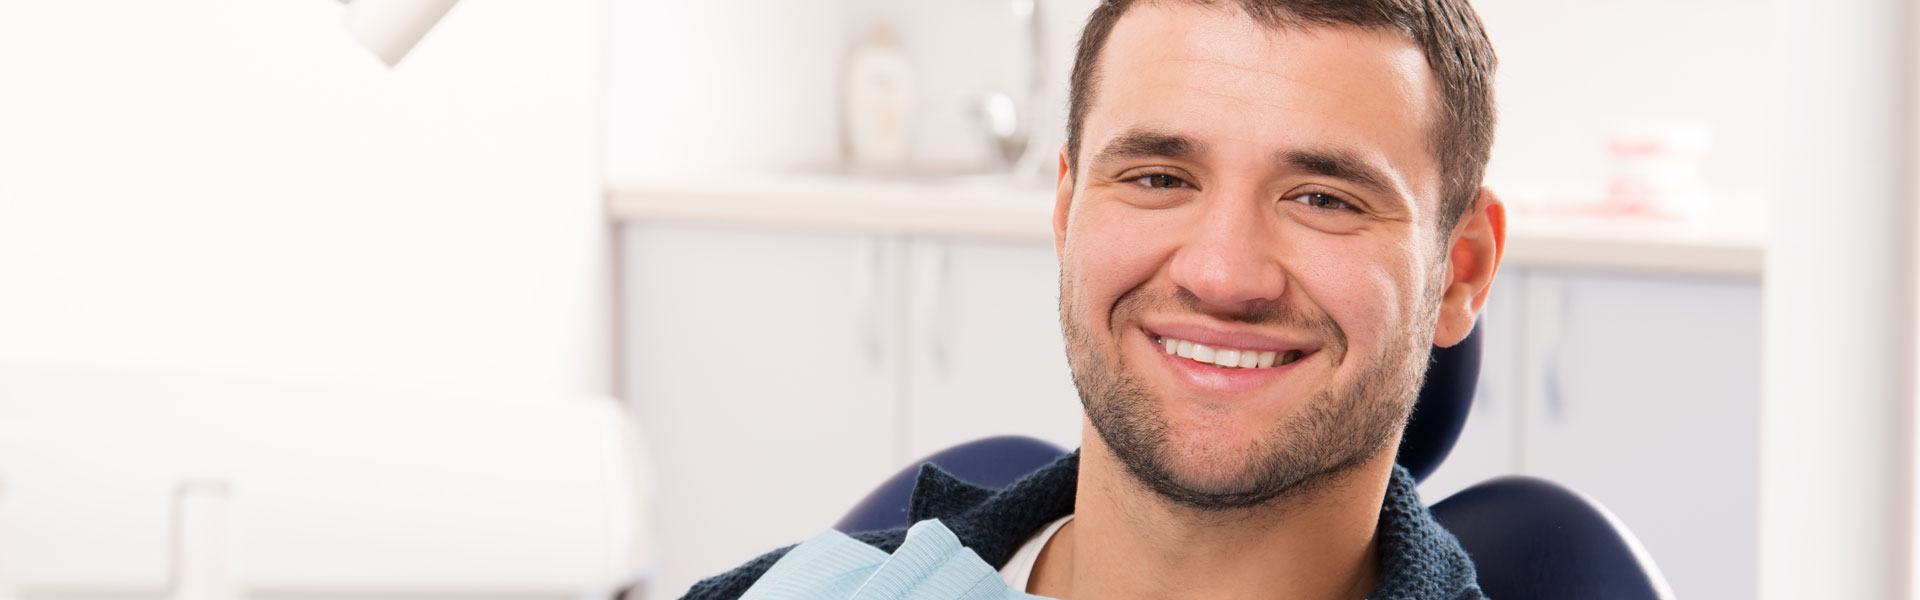 Man getting ready for root canals treatment